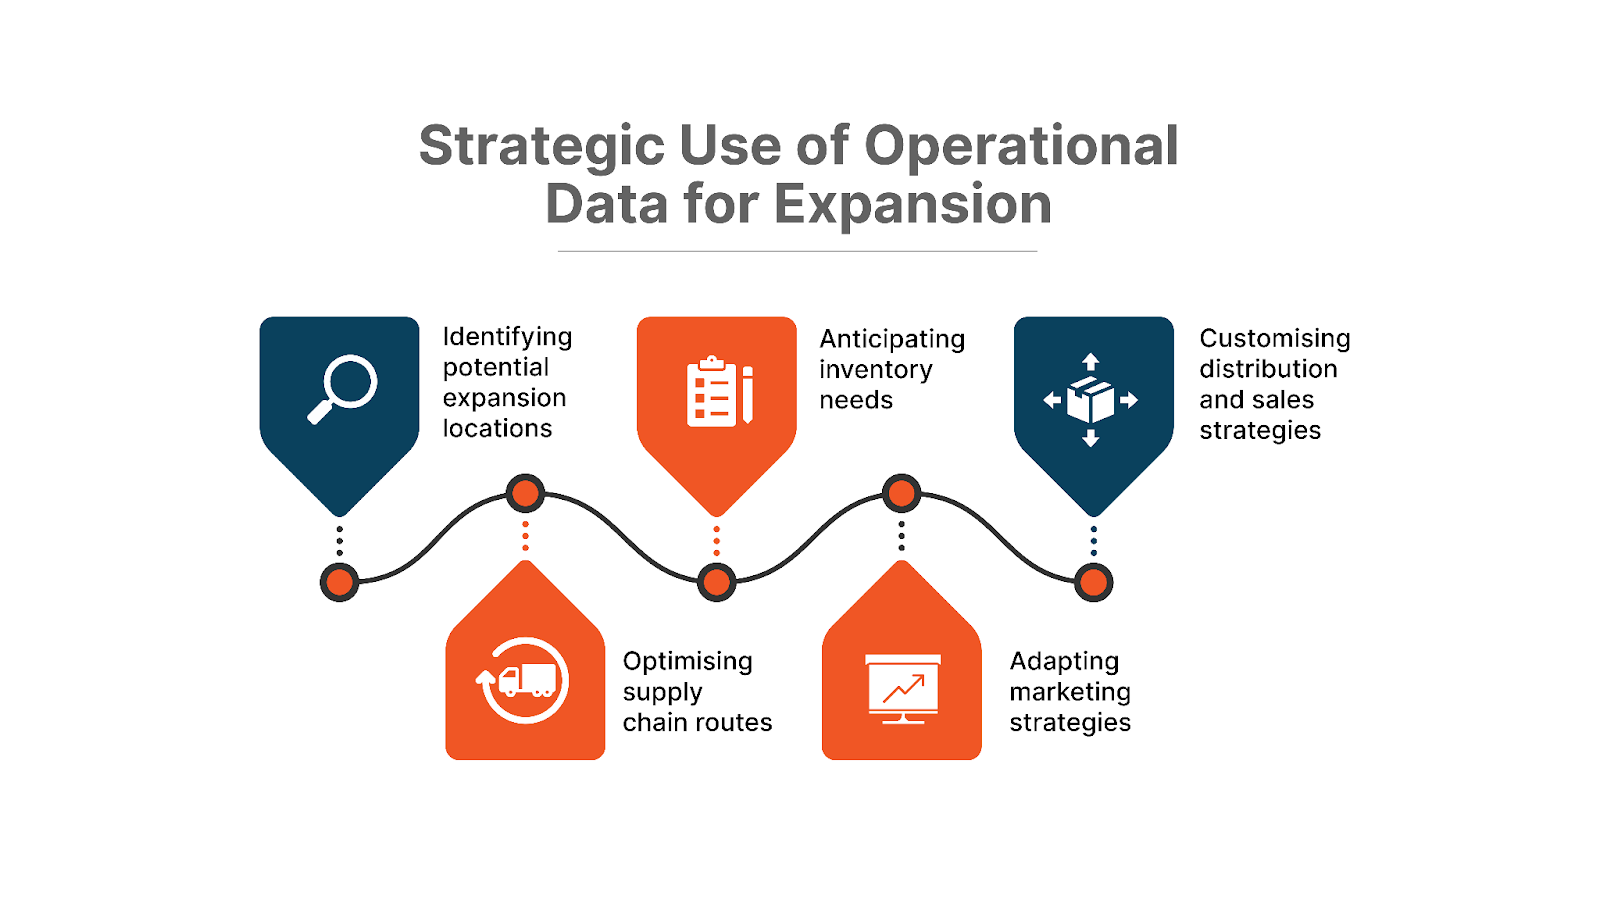 Operational Data: How to Use it Strategically for SMEs Expansion?